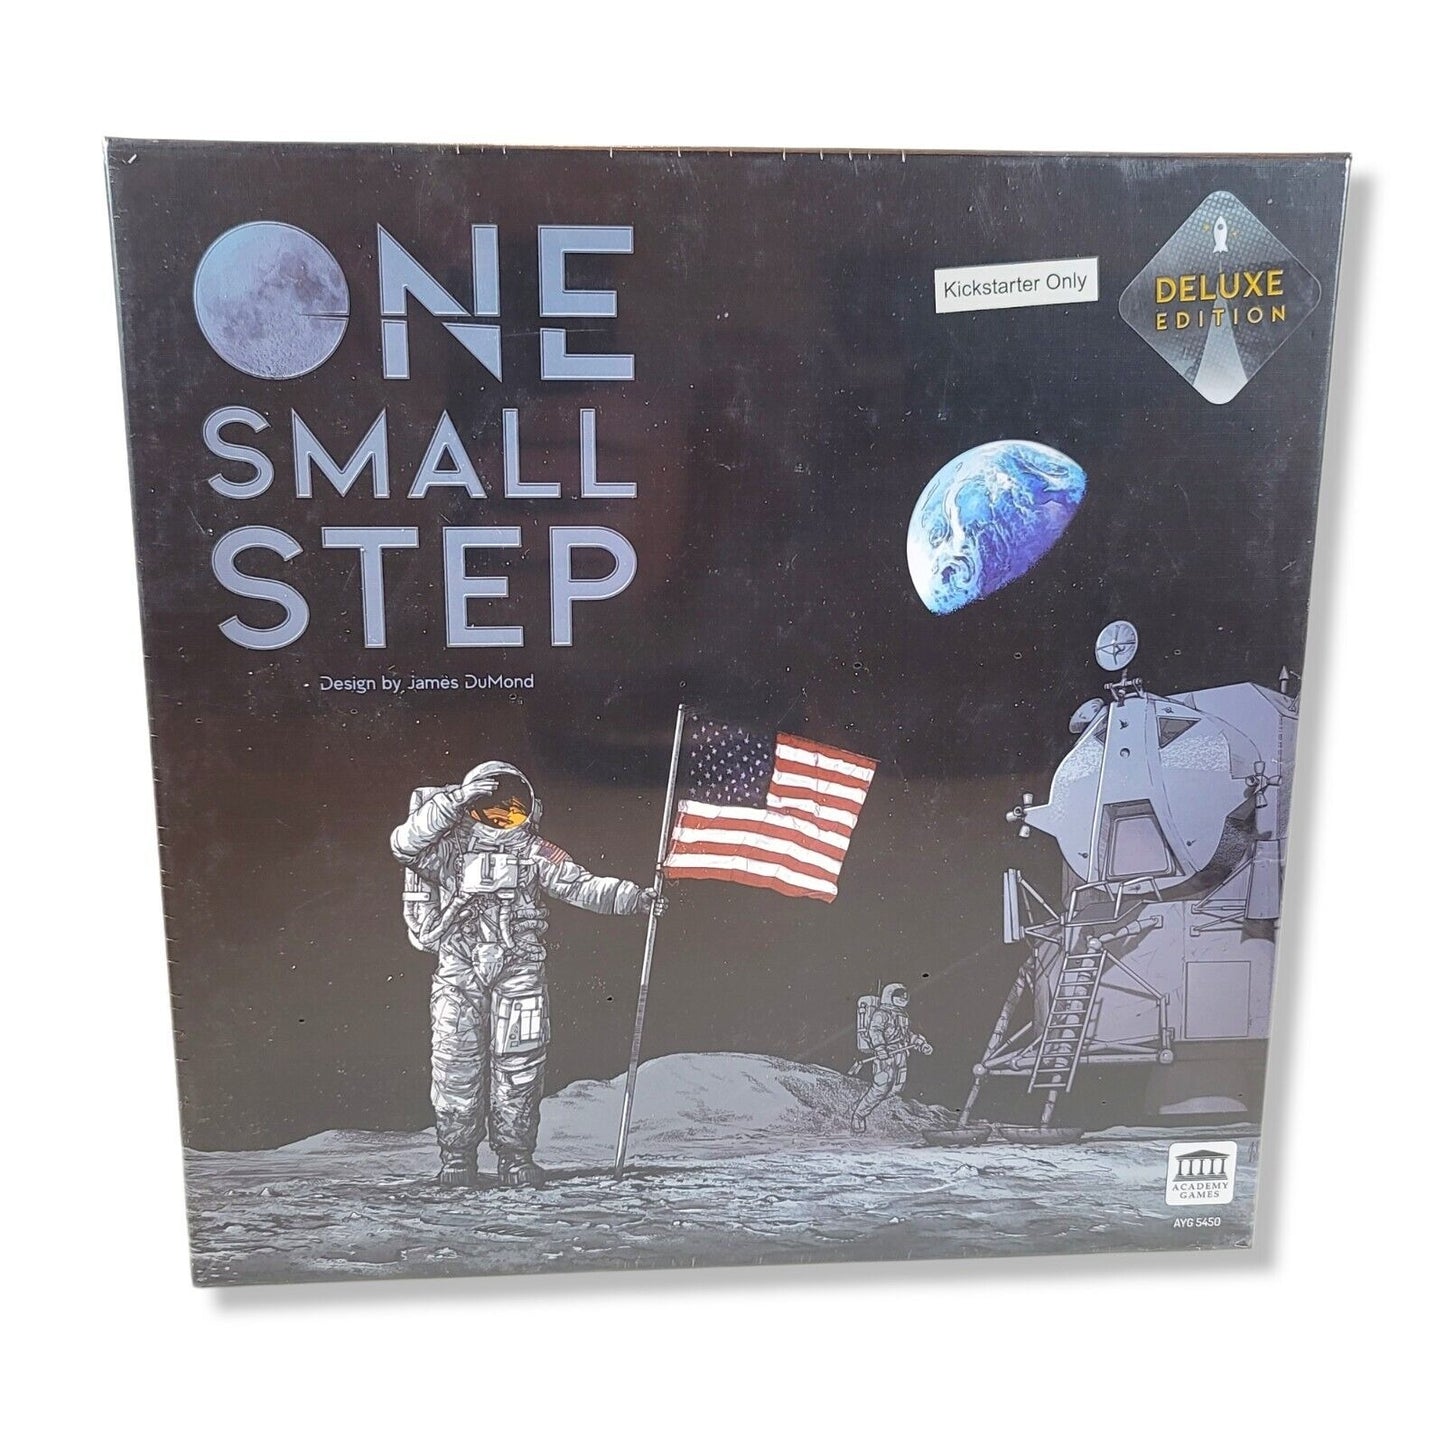 One Small Step Board Game Kickstarter Deluxe Edition w/ Exclusives New Sealed